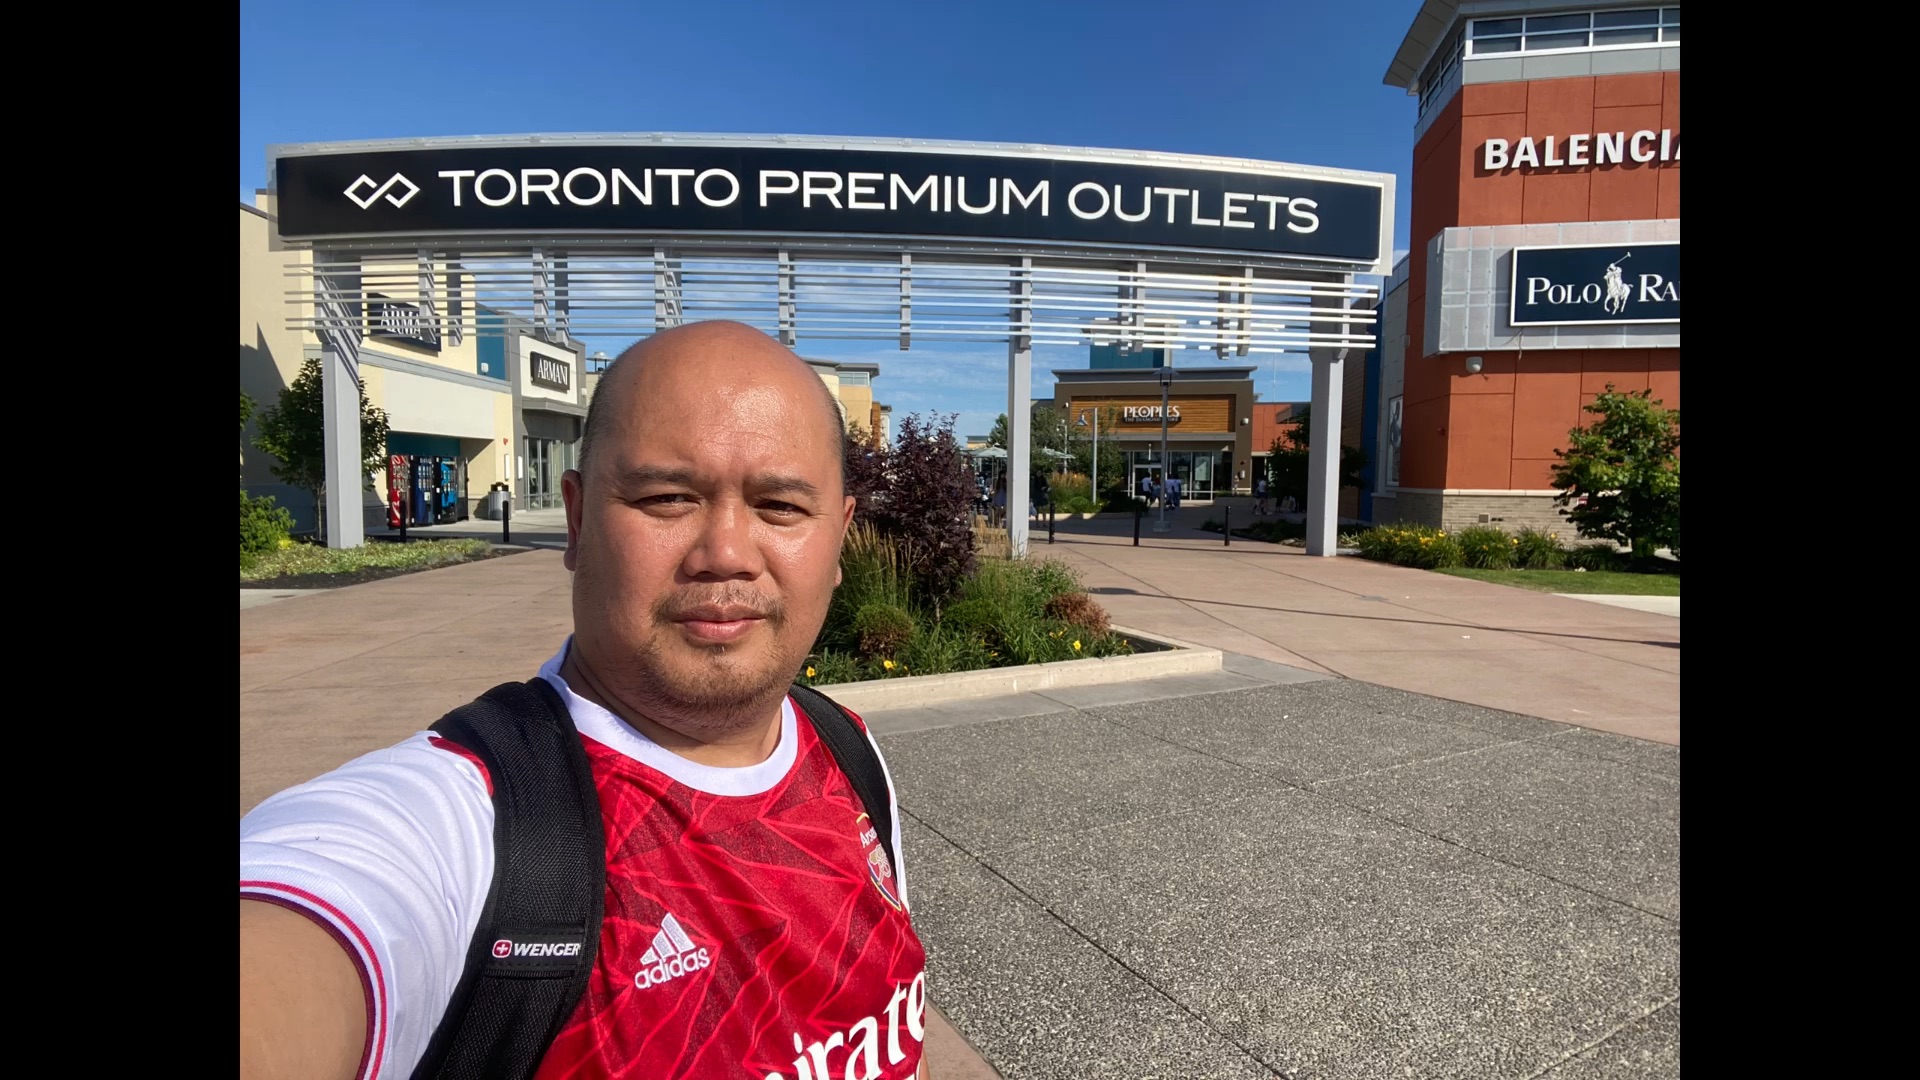 Toronto Premium Outlets - Hornby 🇨🇦